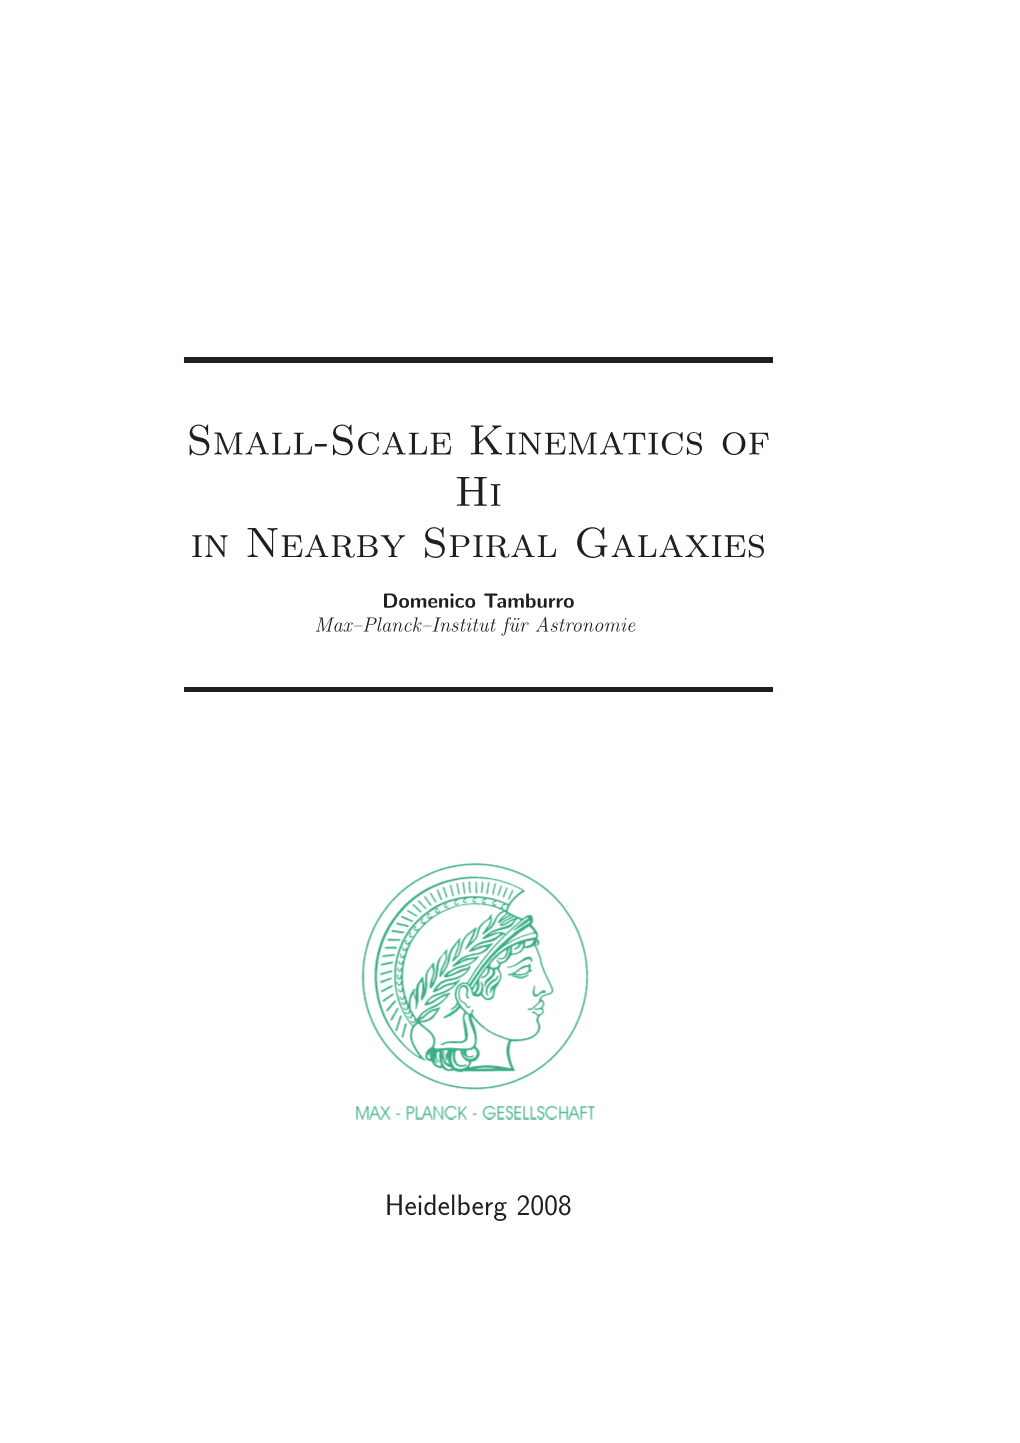 Small-Scale Kinematics of Hi in Nearby Spiral Galaxies